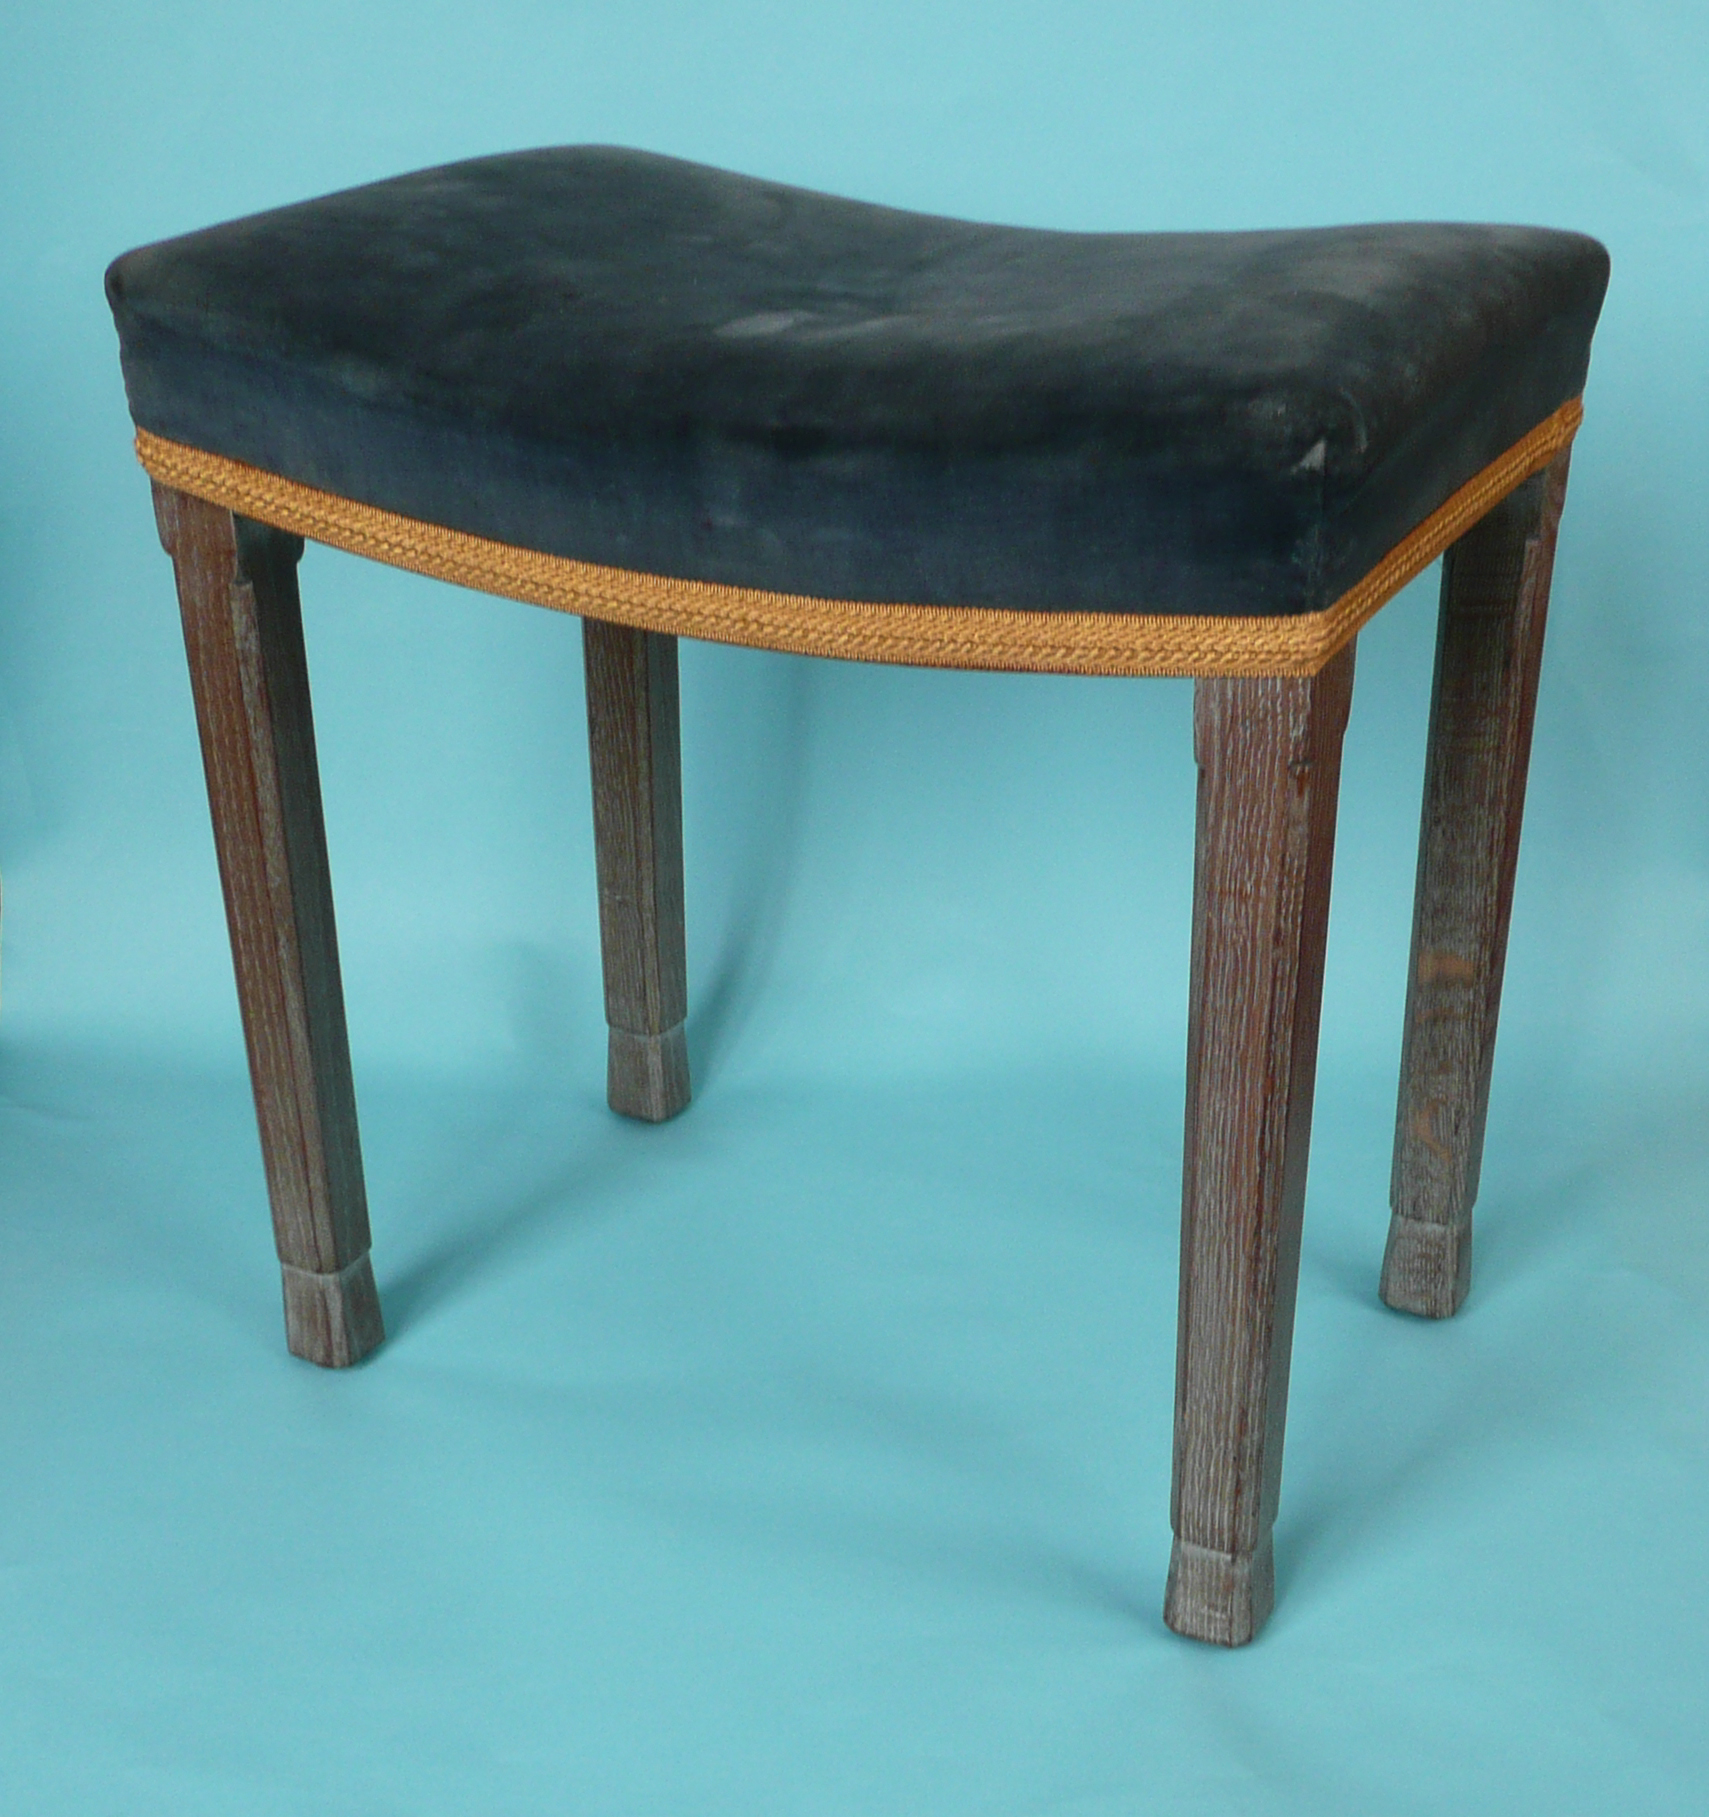 1953 Coronation: a limed oak and blue upholstered coronation stool by Glenster, very original